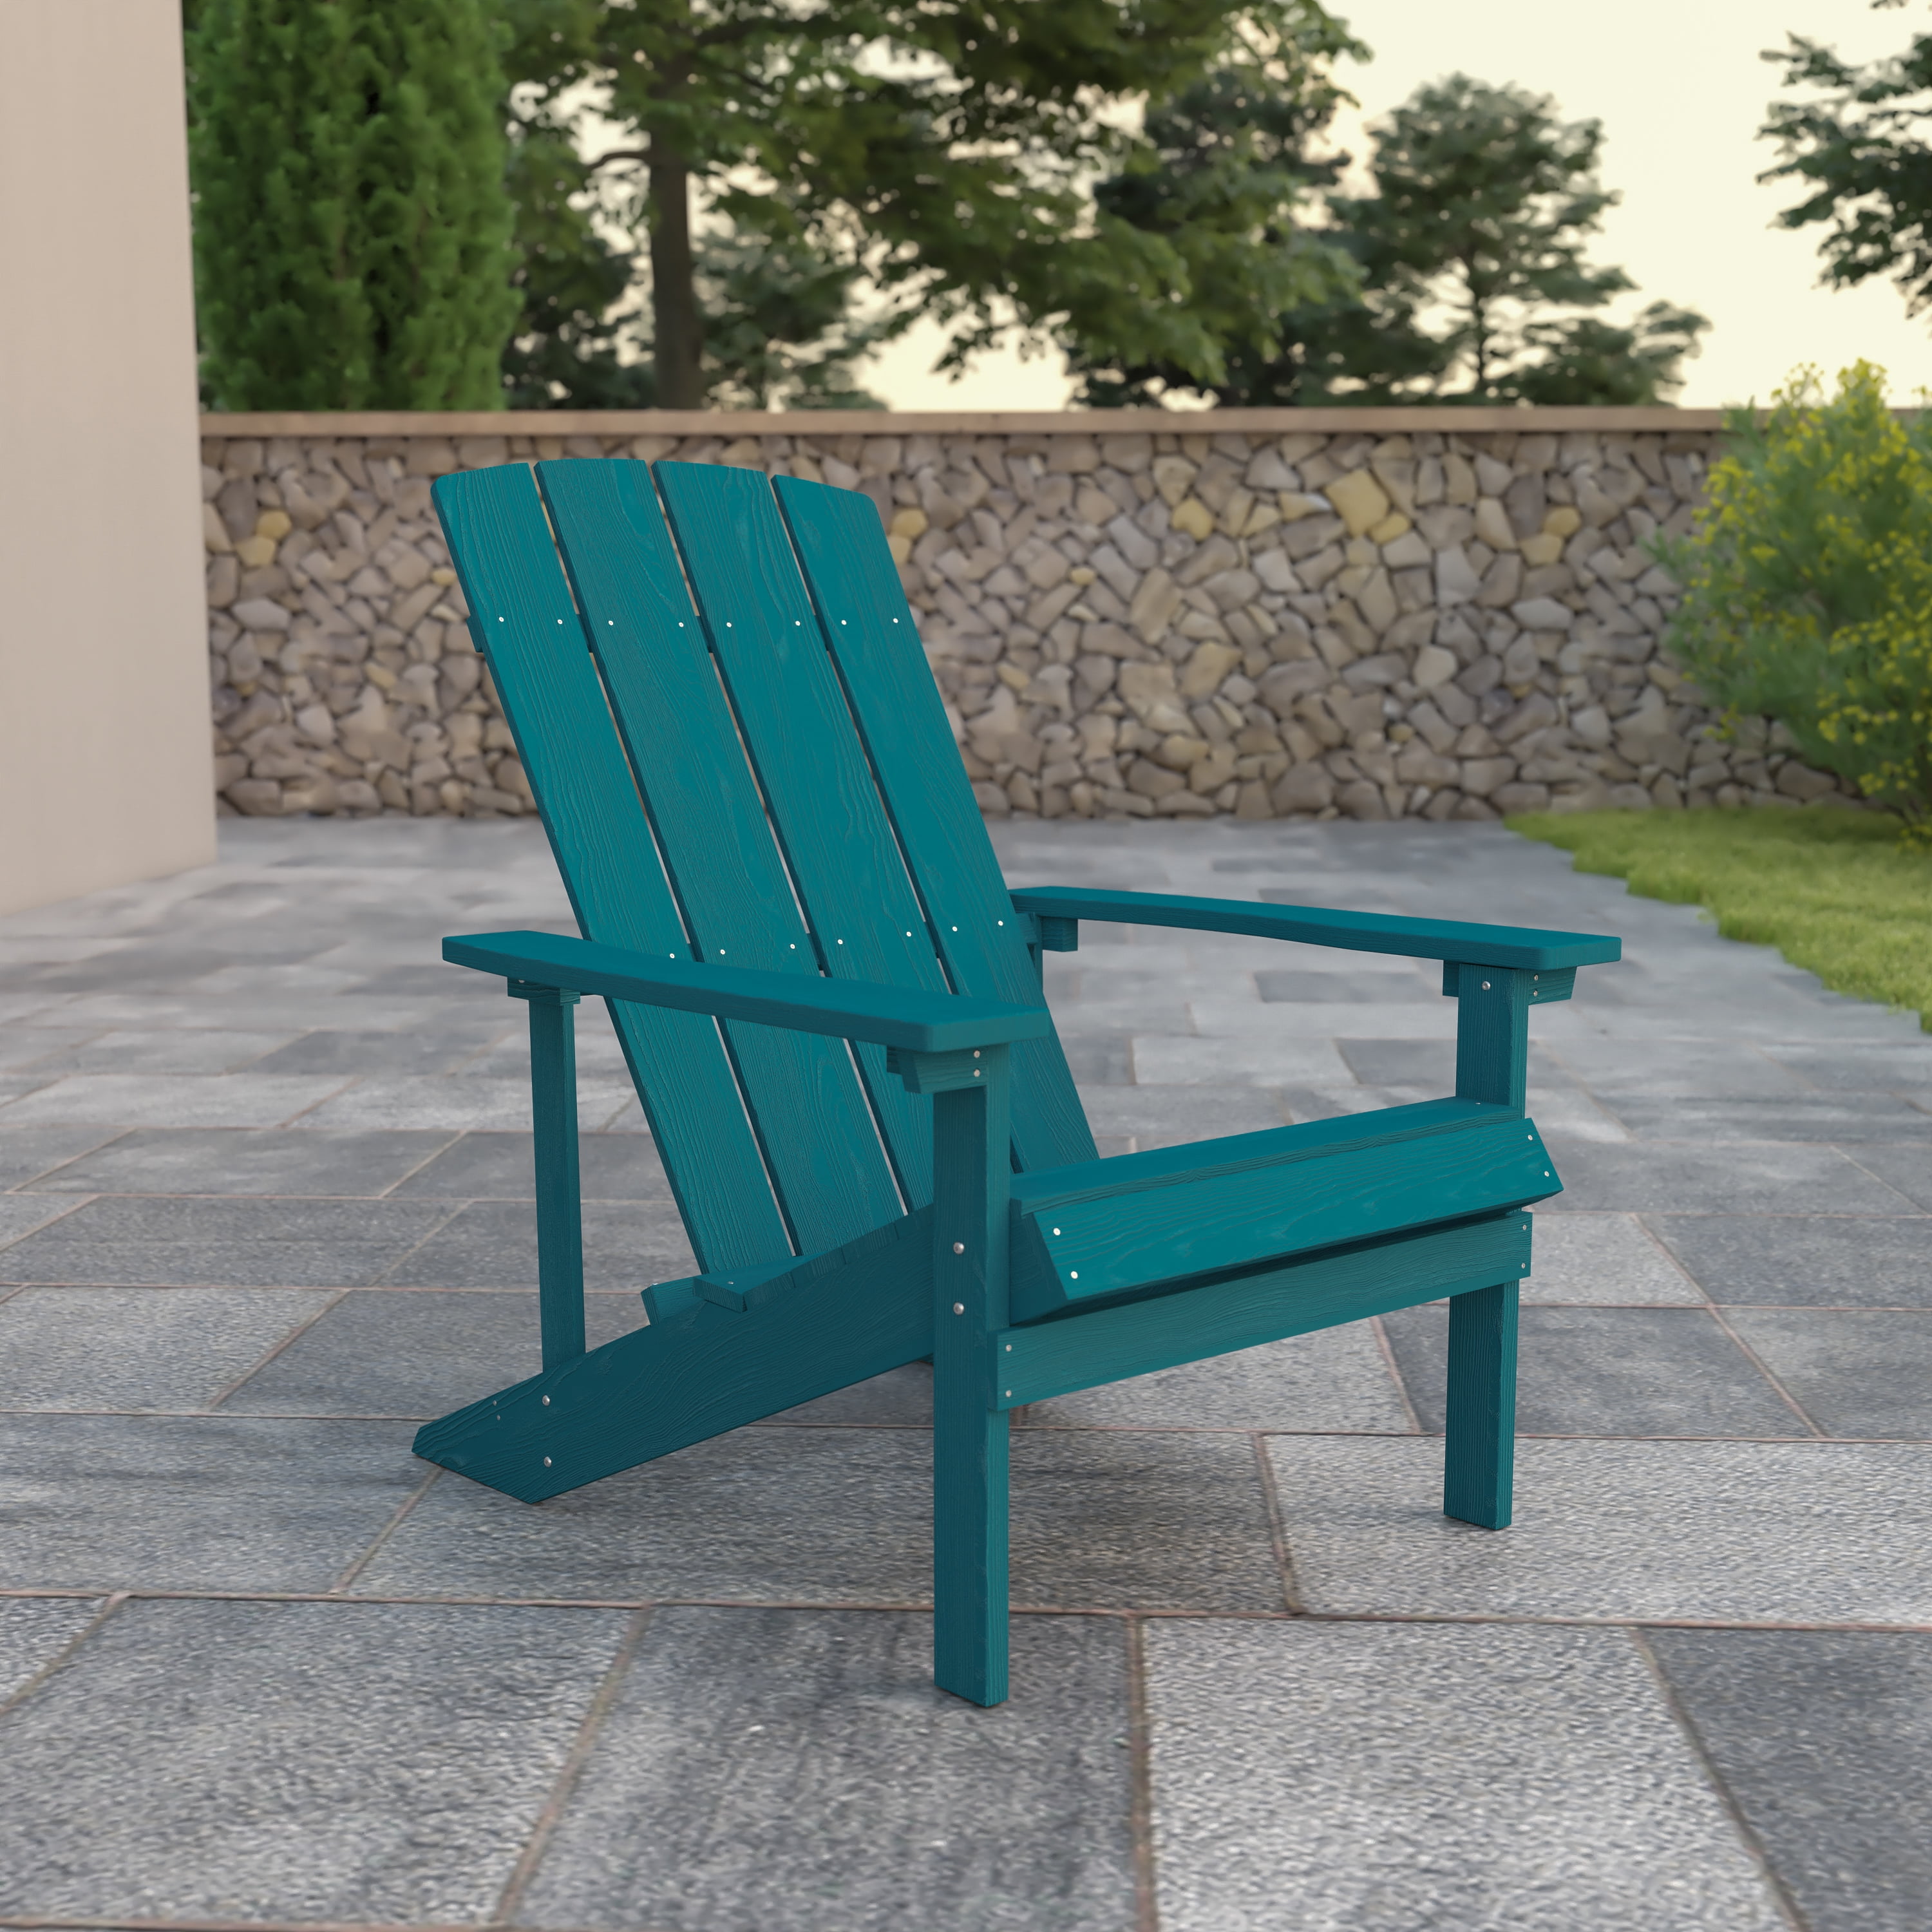 WenHaus Adirondack Chair Plastic Resin Deck Chair Blue Patio Outdoor Chairs Painted Weather Resistant Lounge Lawn Chair Fire Pit Chairs 